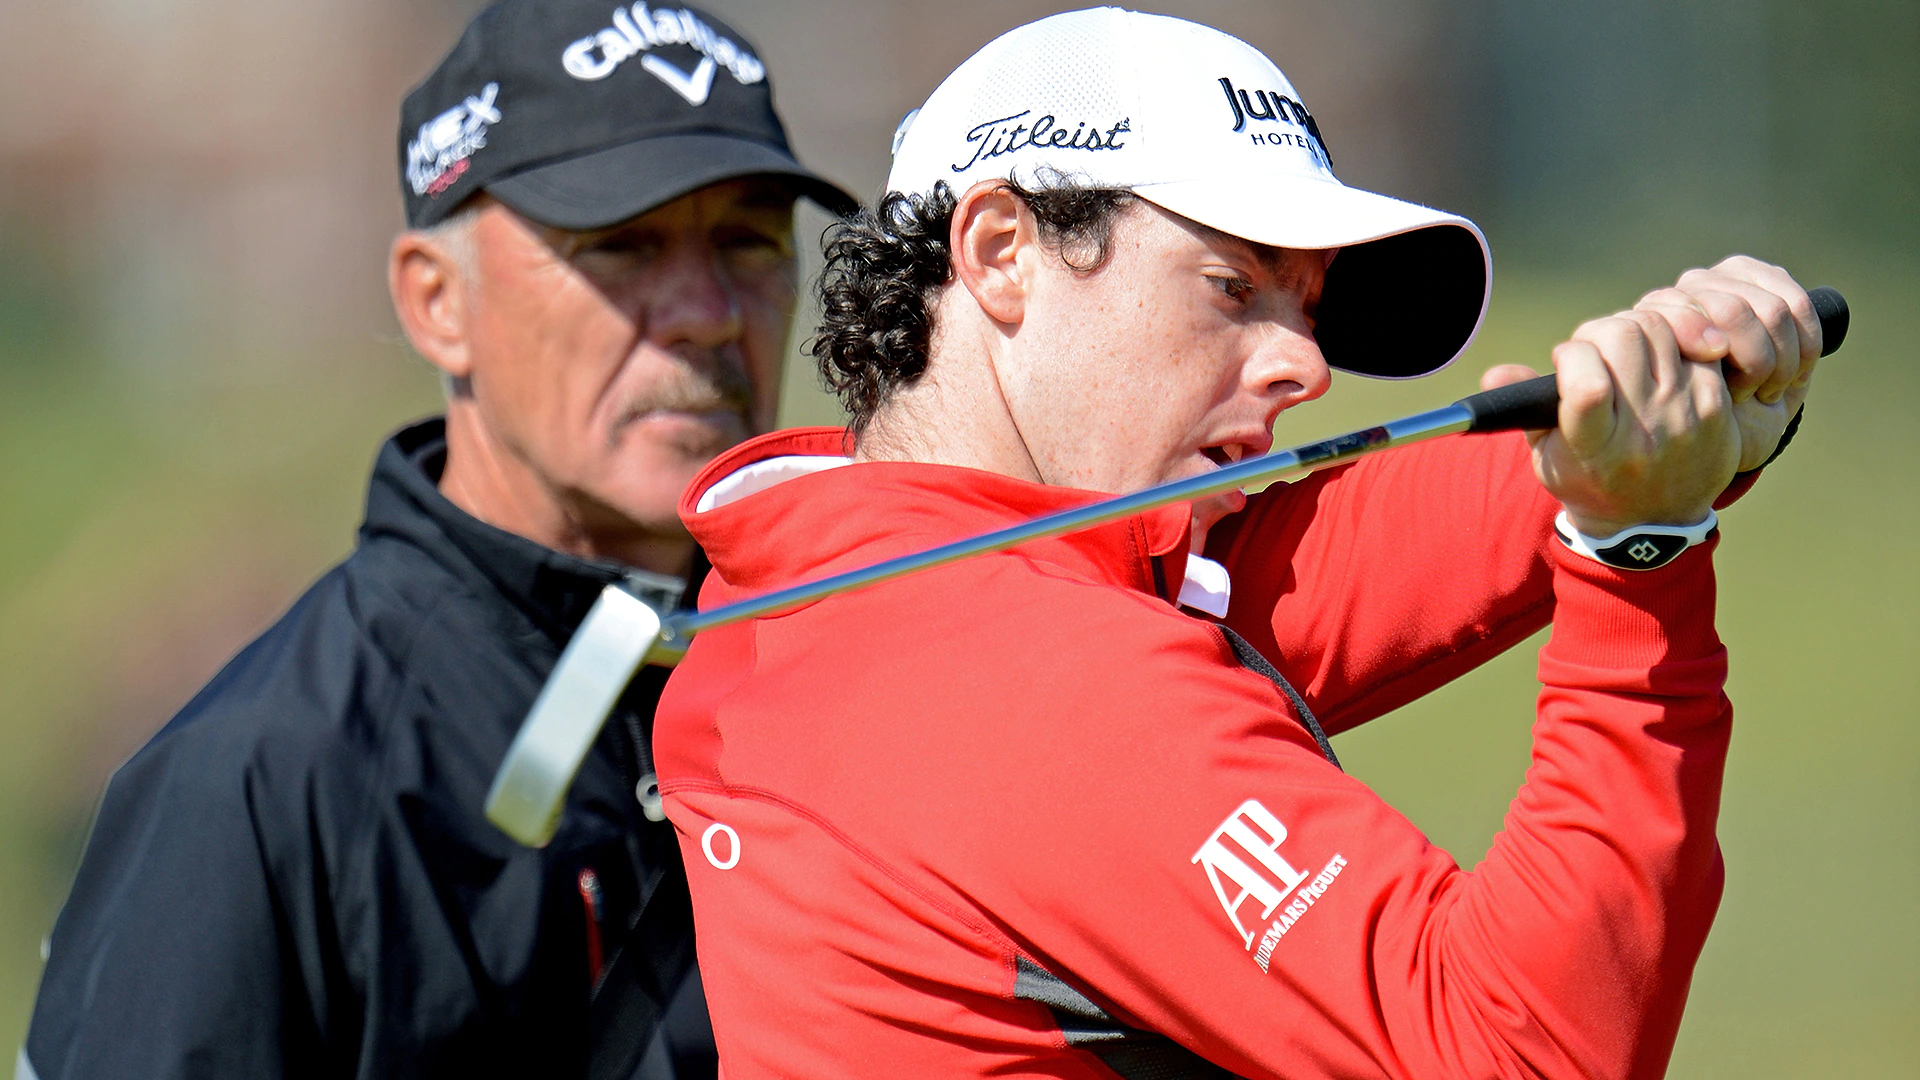 Report: Rory McIlroy to begin working with swing coach Pete Cowen